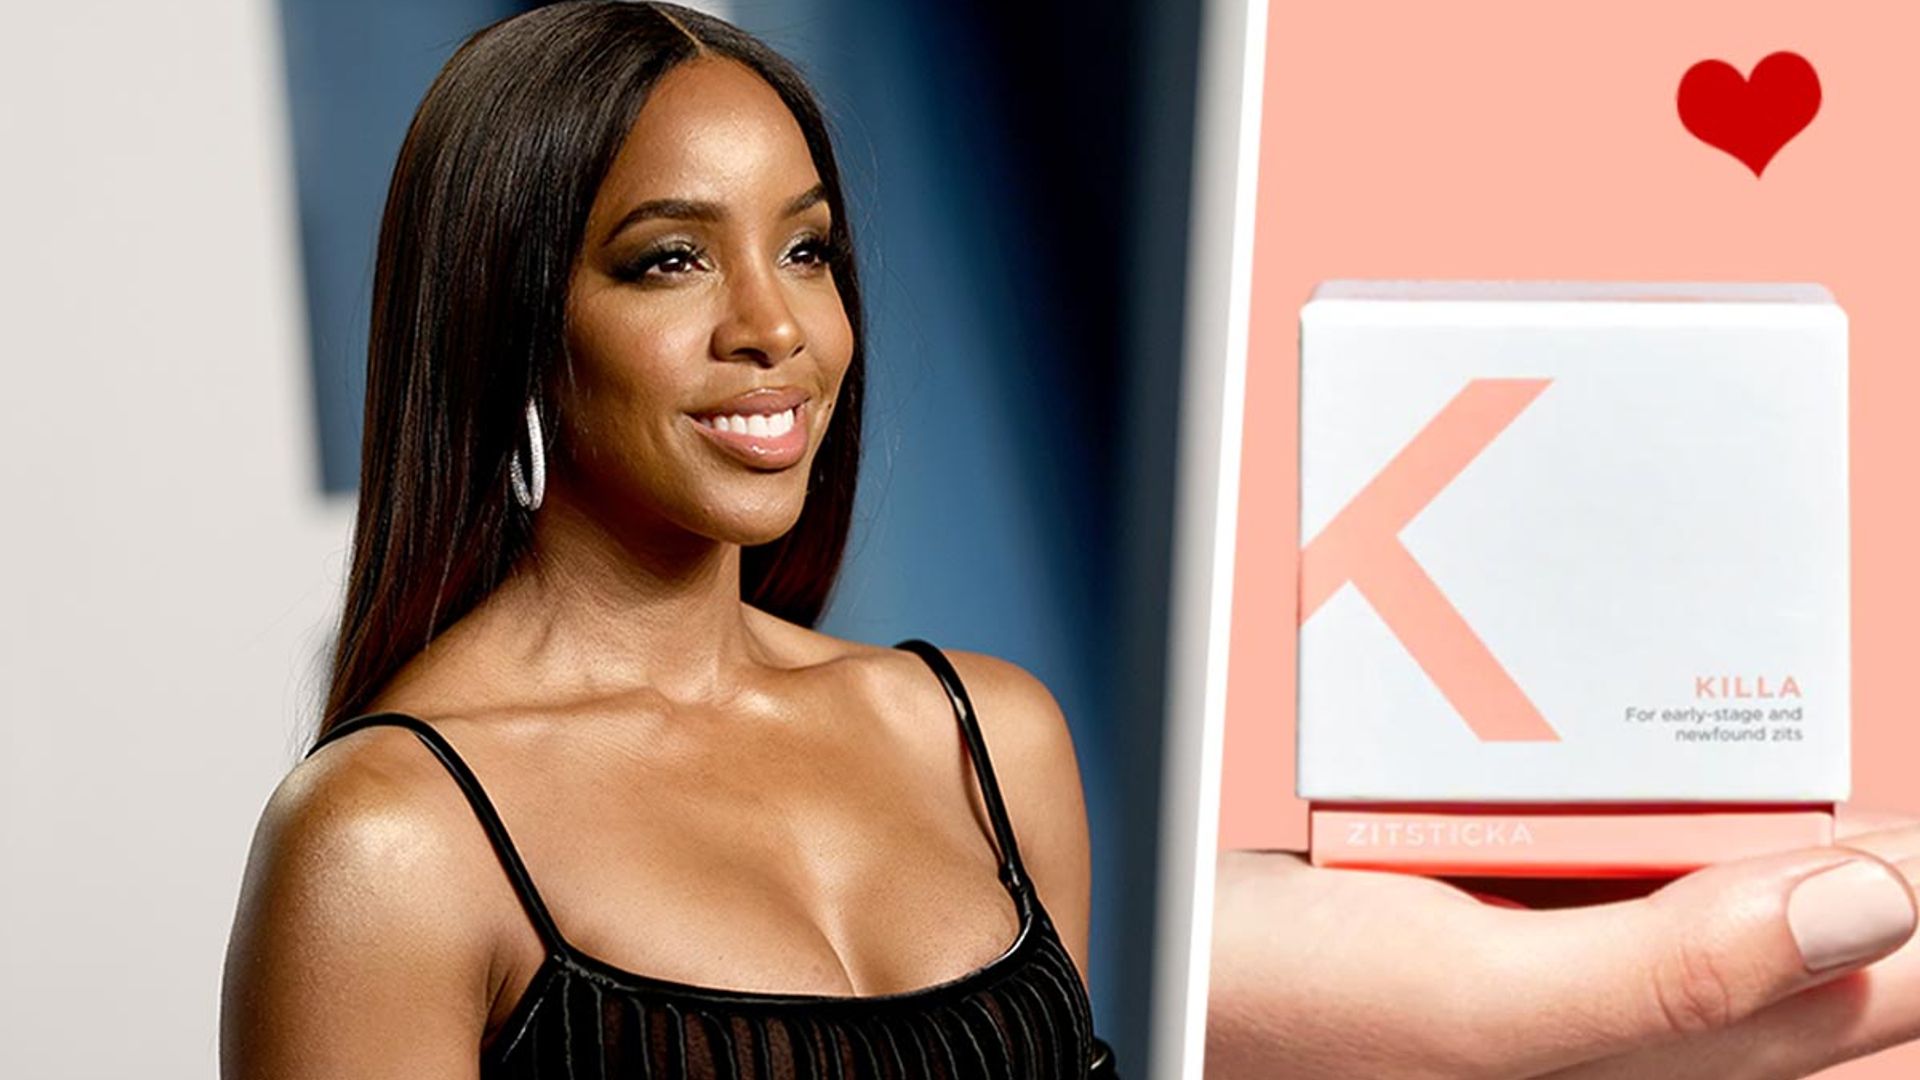 Kelly Rowland swears by TikTok-famous Zitstickas to treat blemishes